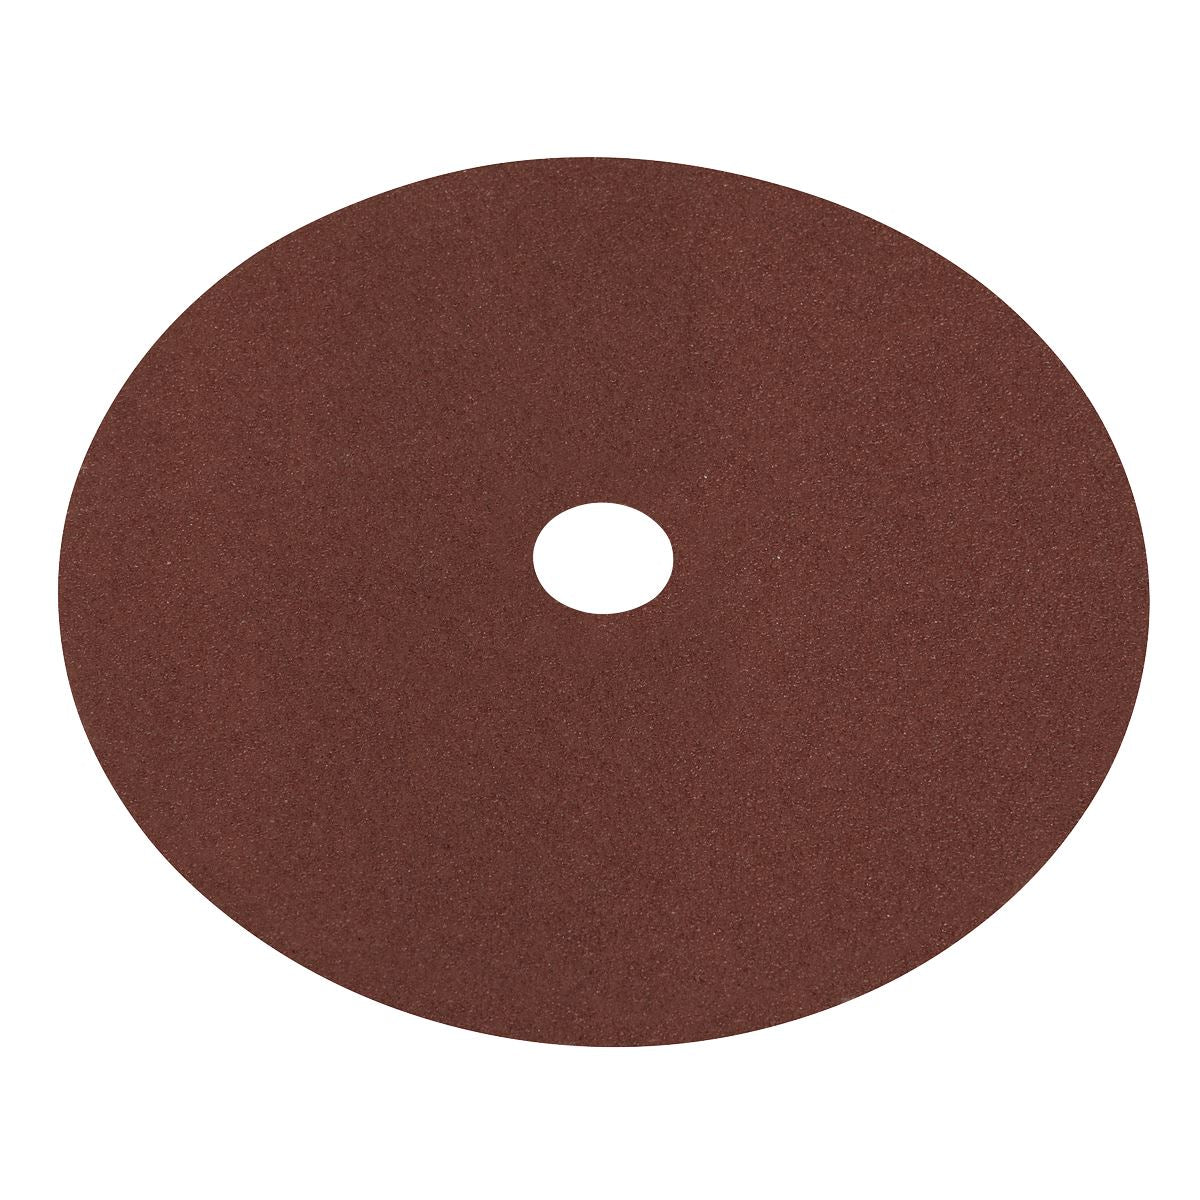 Worksafe by Sealey Ø175mm Fibre Backed Disc 60Grit - Pack of 25